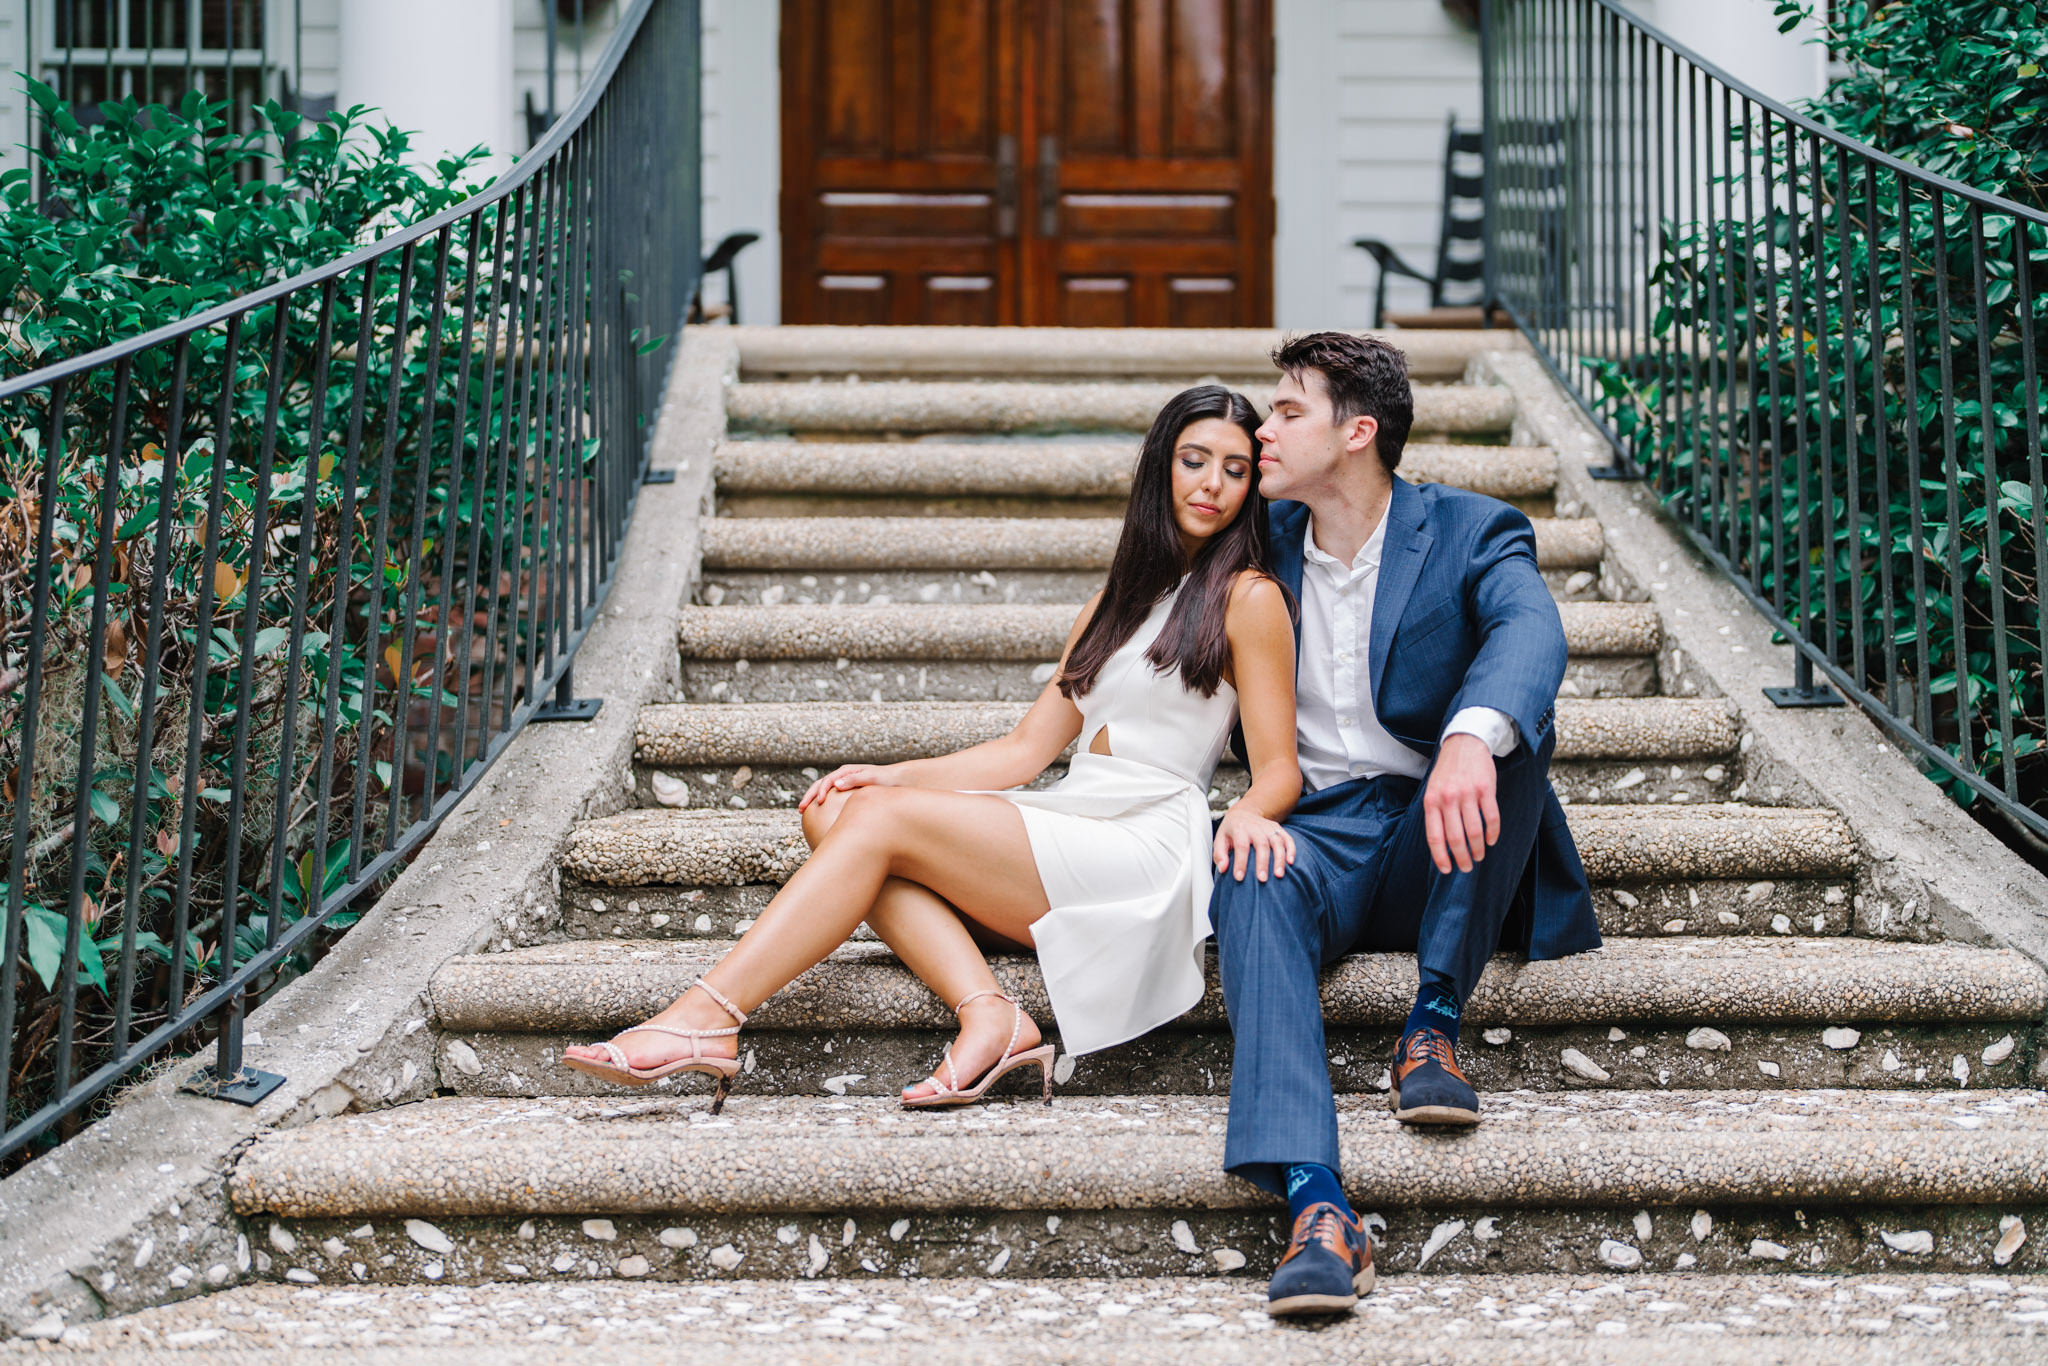 The Sweetest Summer Engagement at Caledonia in Pawleys Island